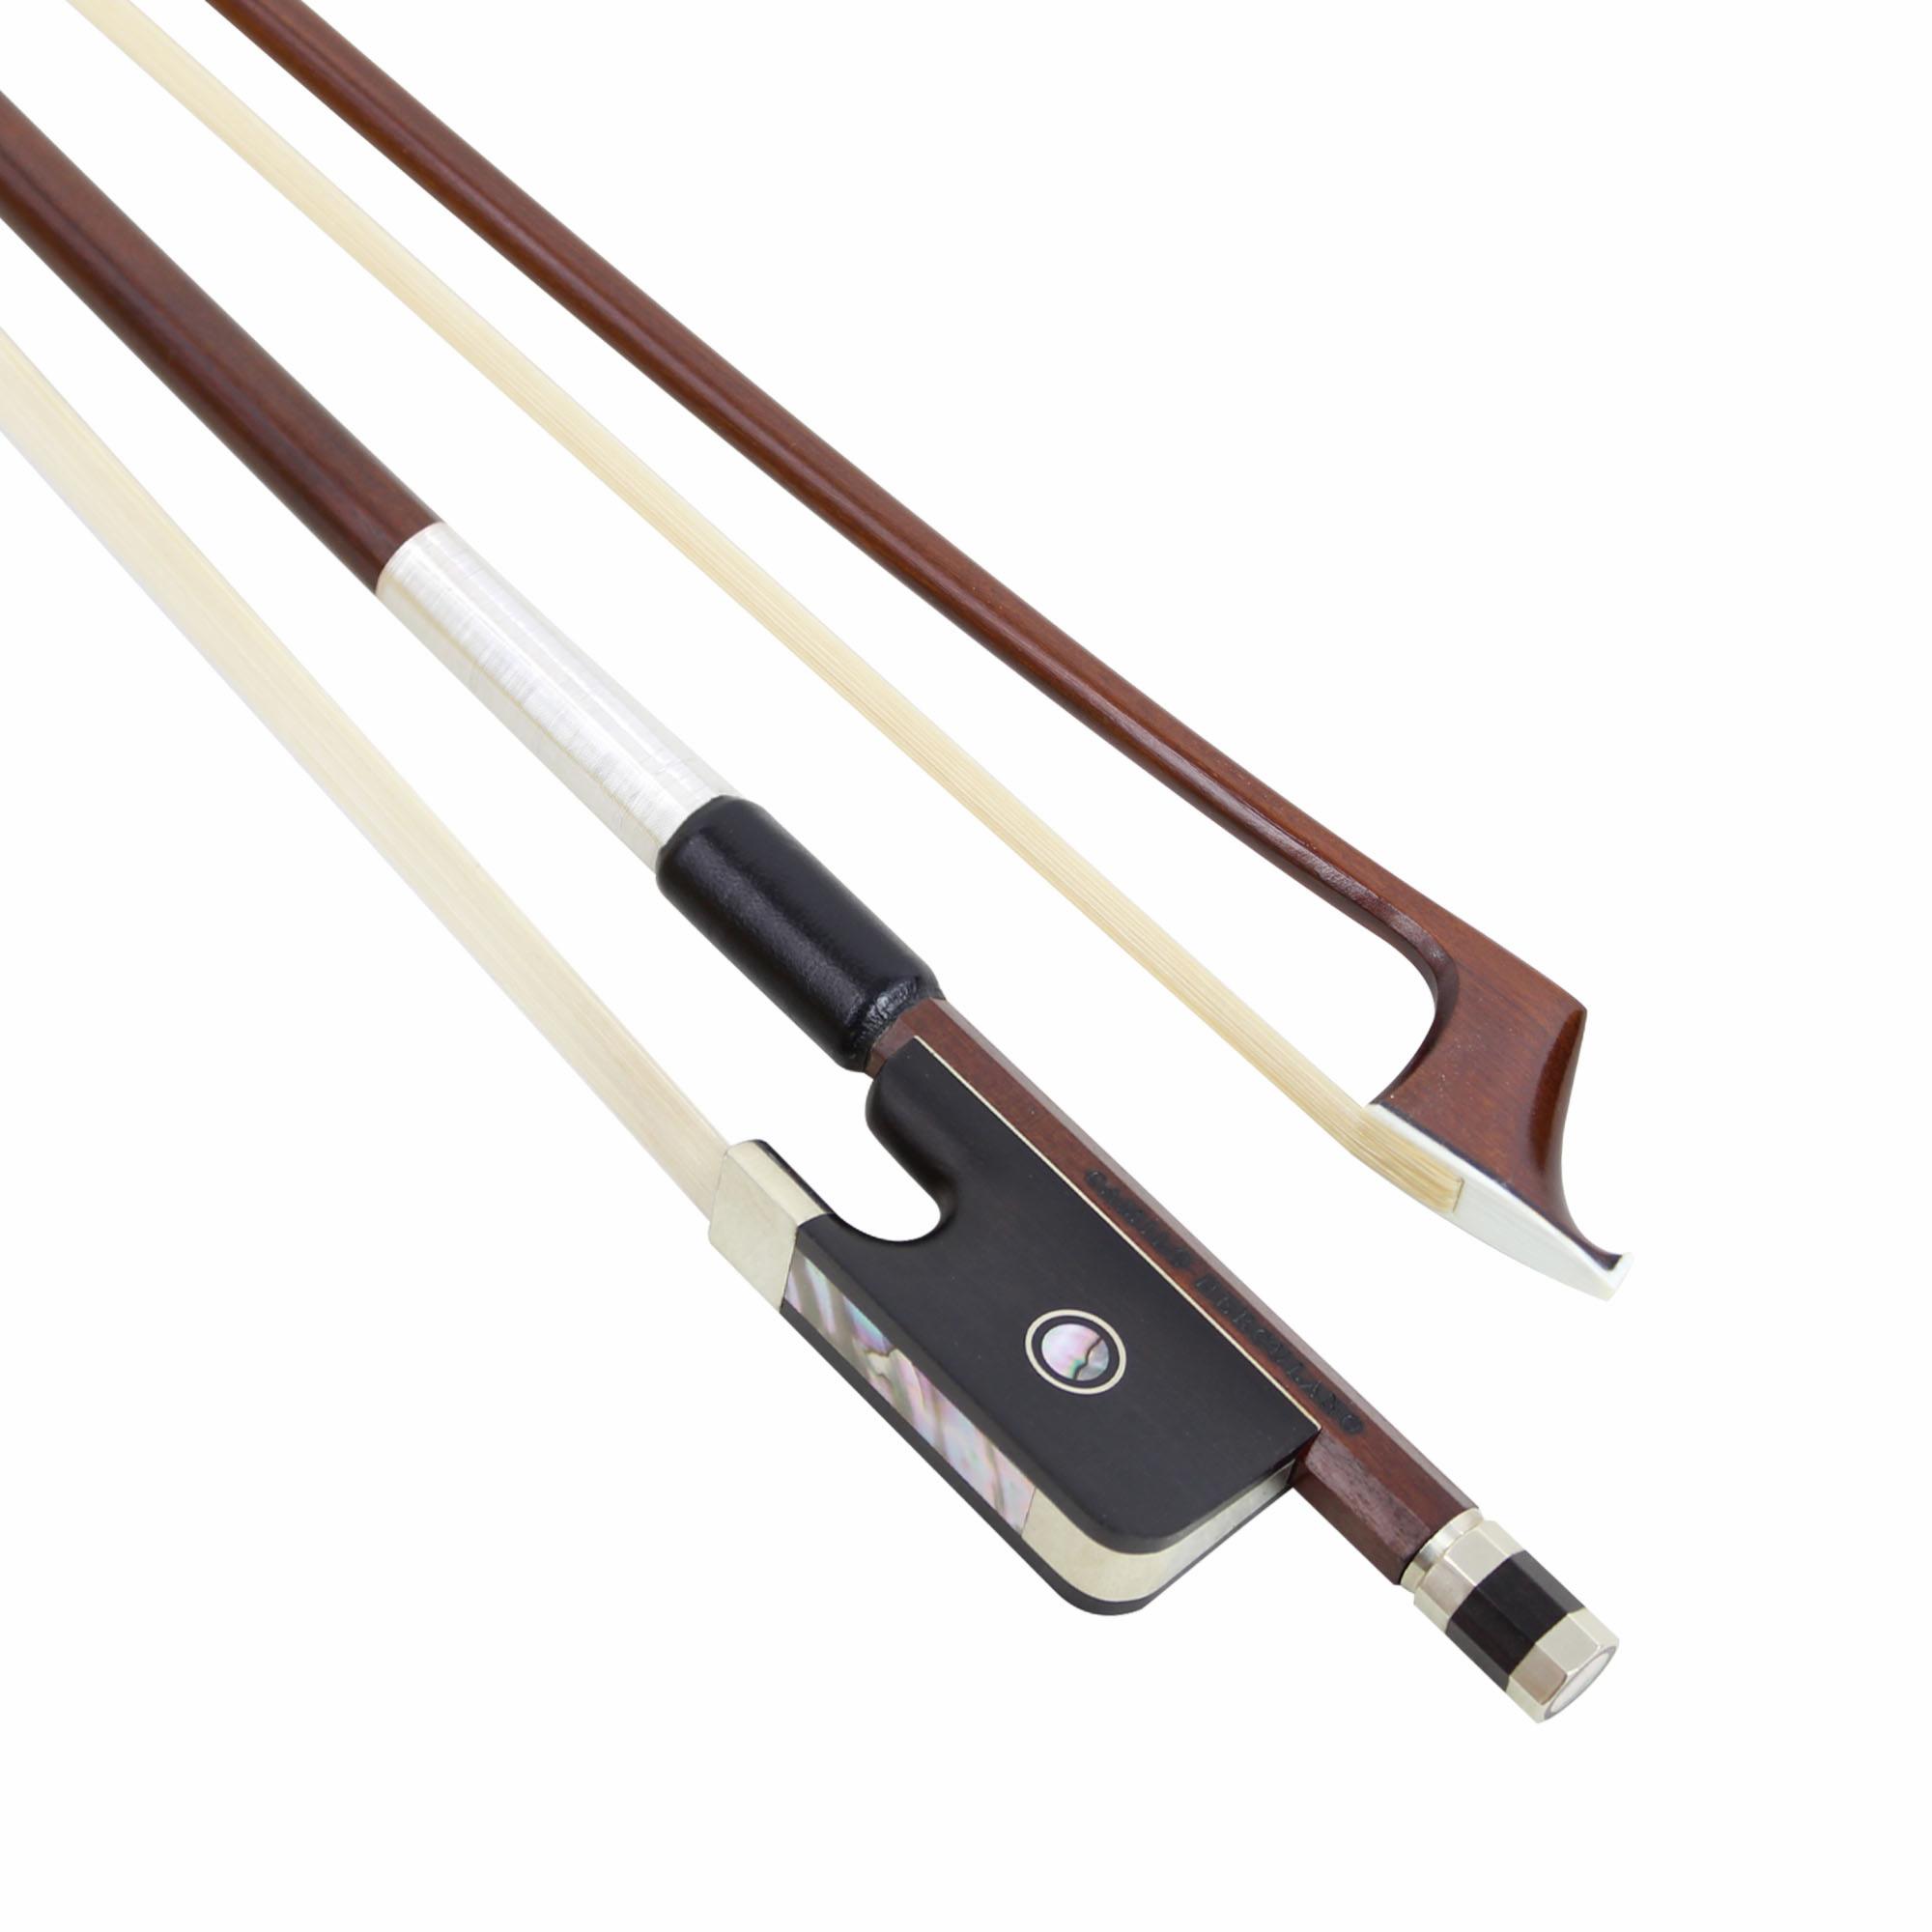 L'Archet IPE Fully mounted nickel  Cello Bow